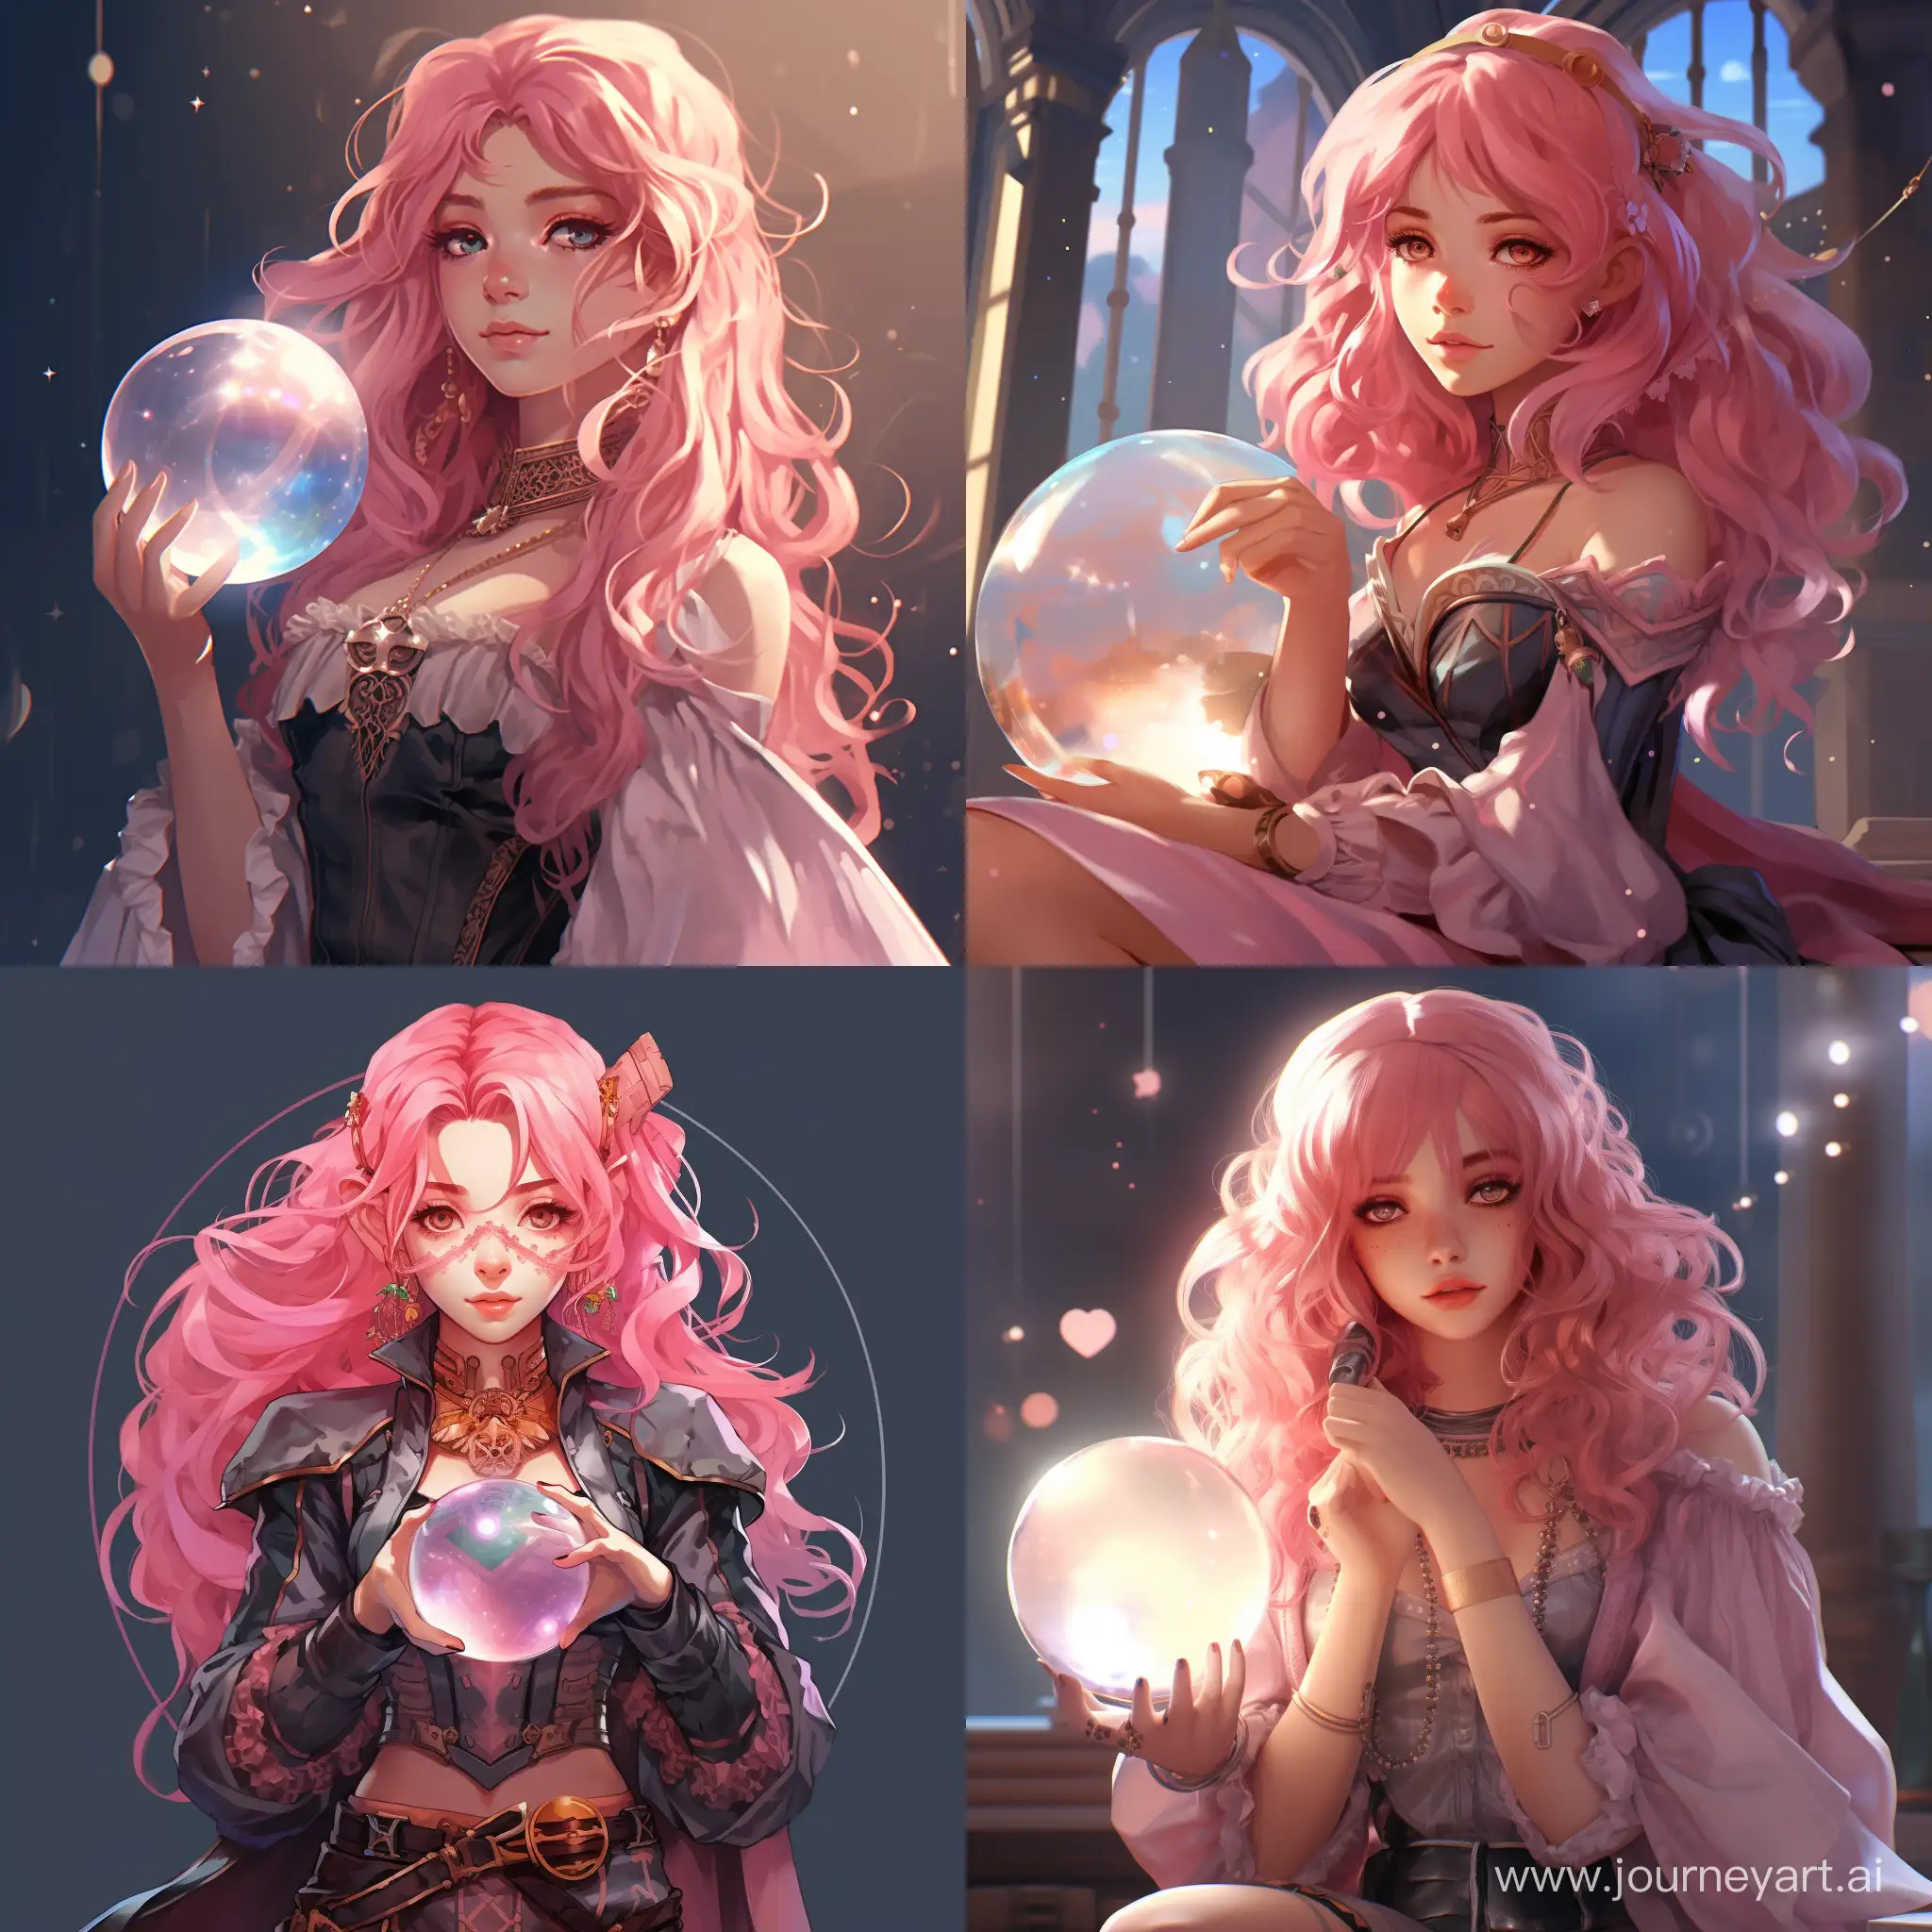 Anime wizard girl with pink hair and a crystal ball